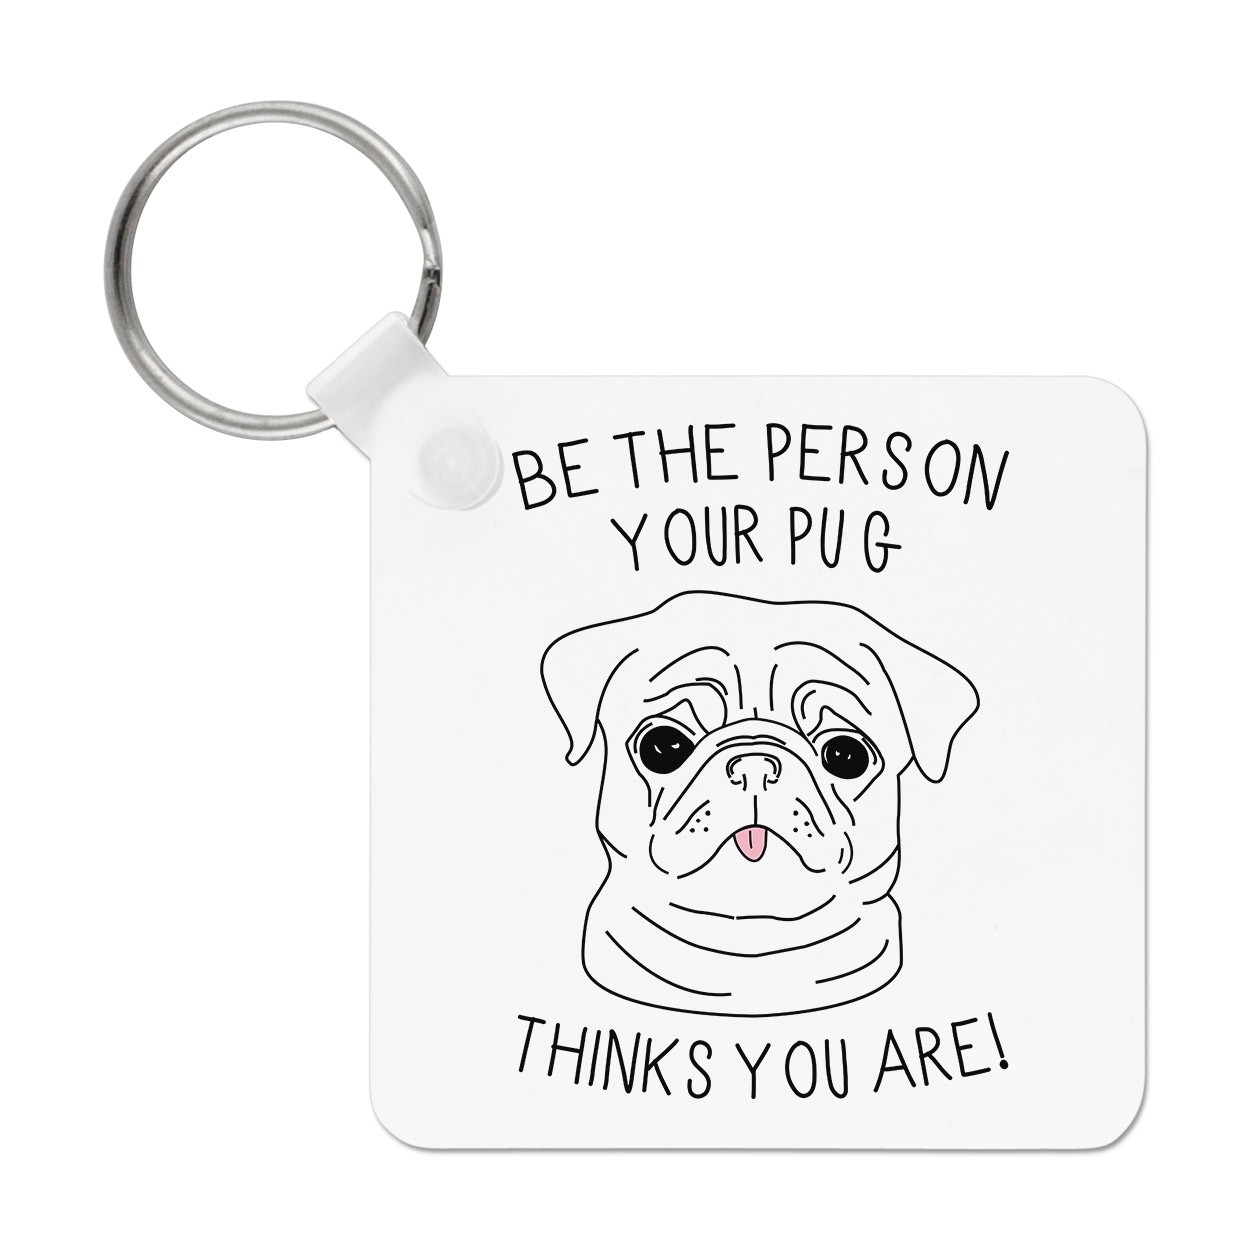 Be The Person Your Pug Thinks You Are Keyring Key Chain